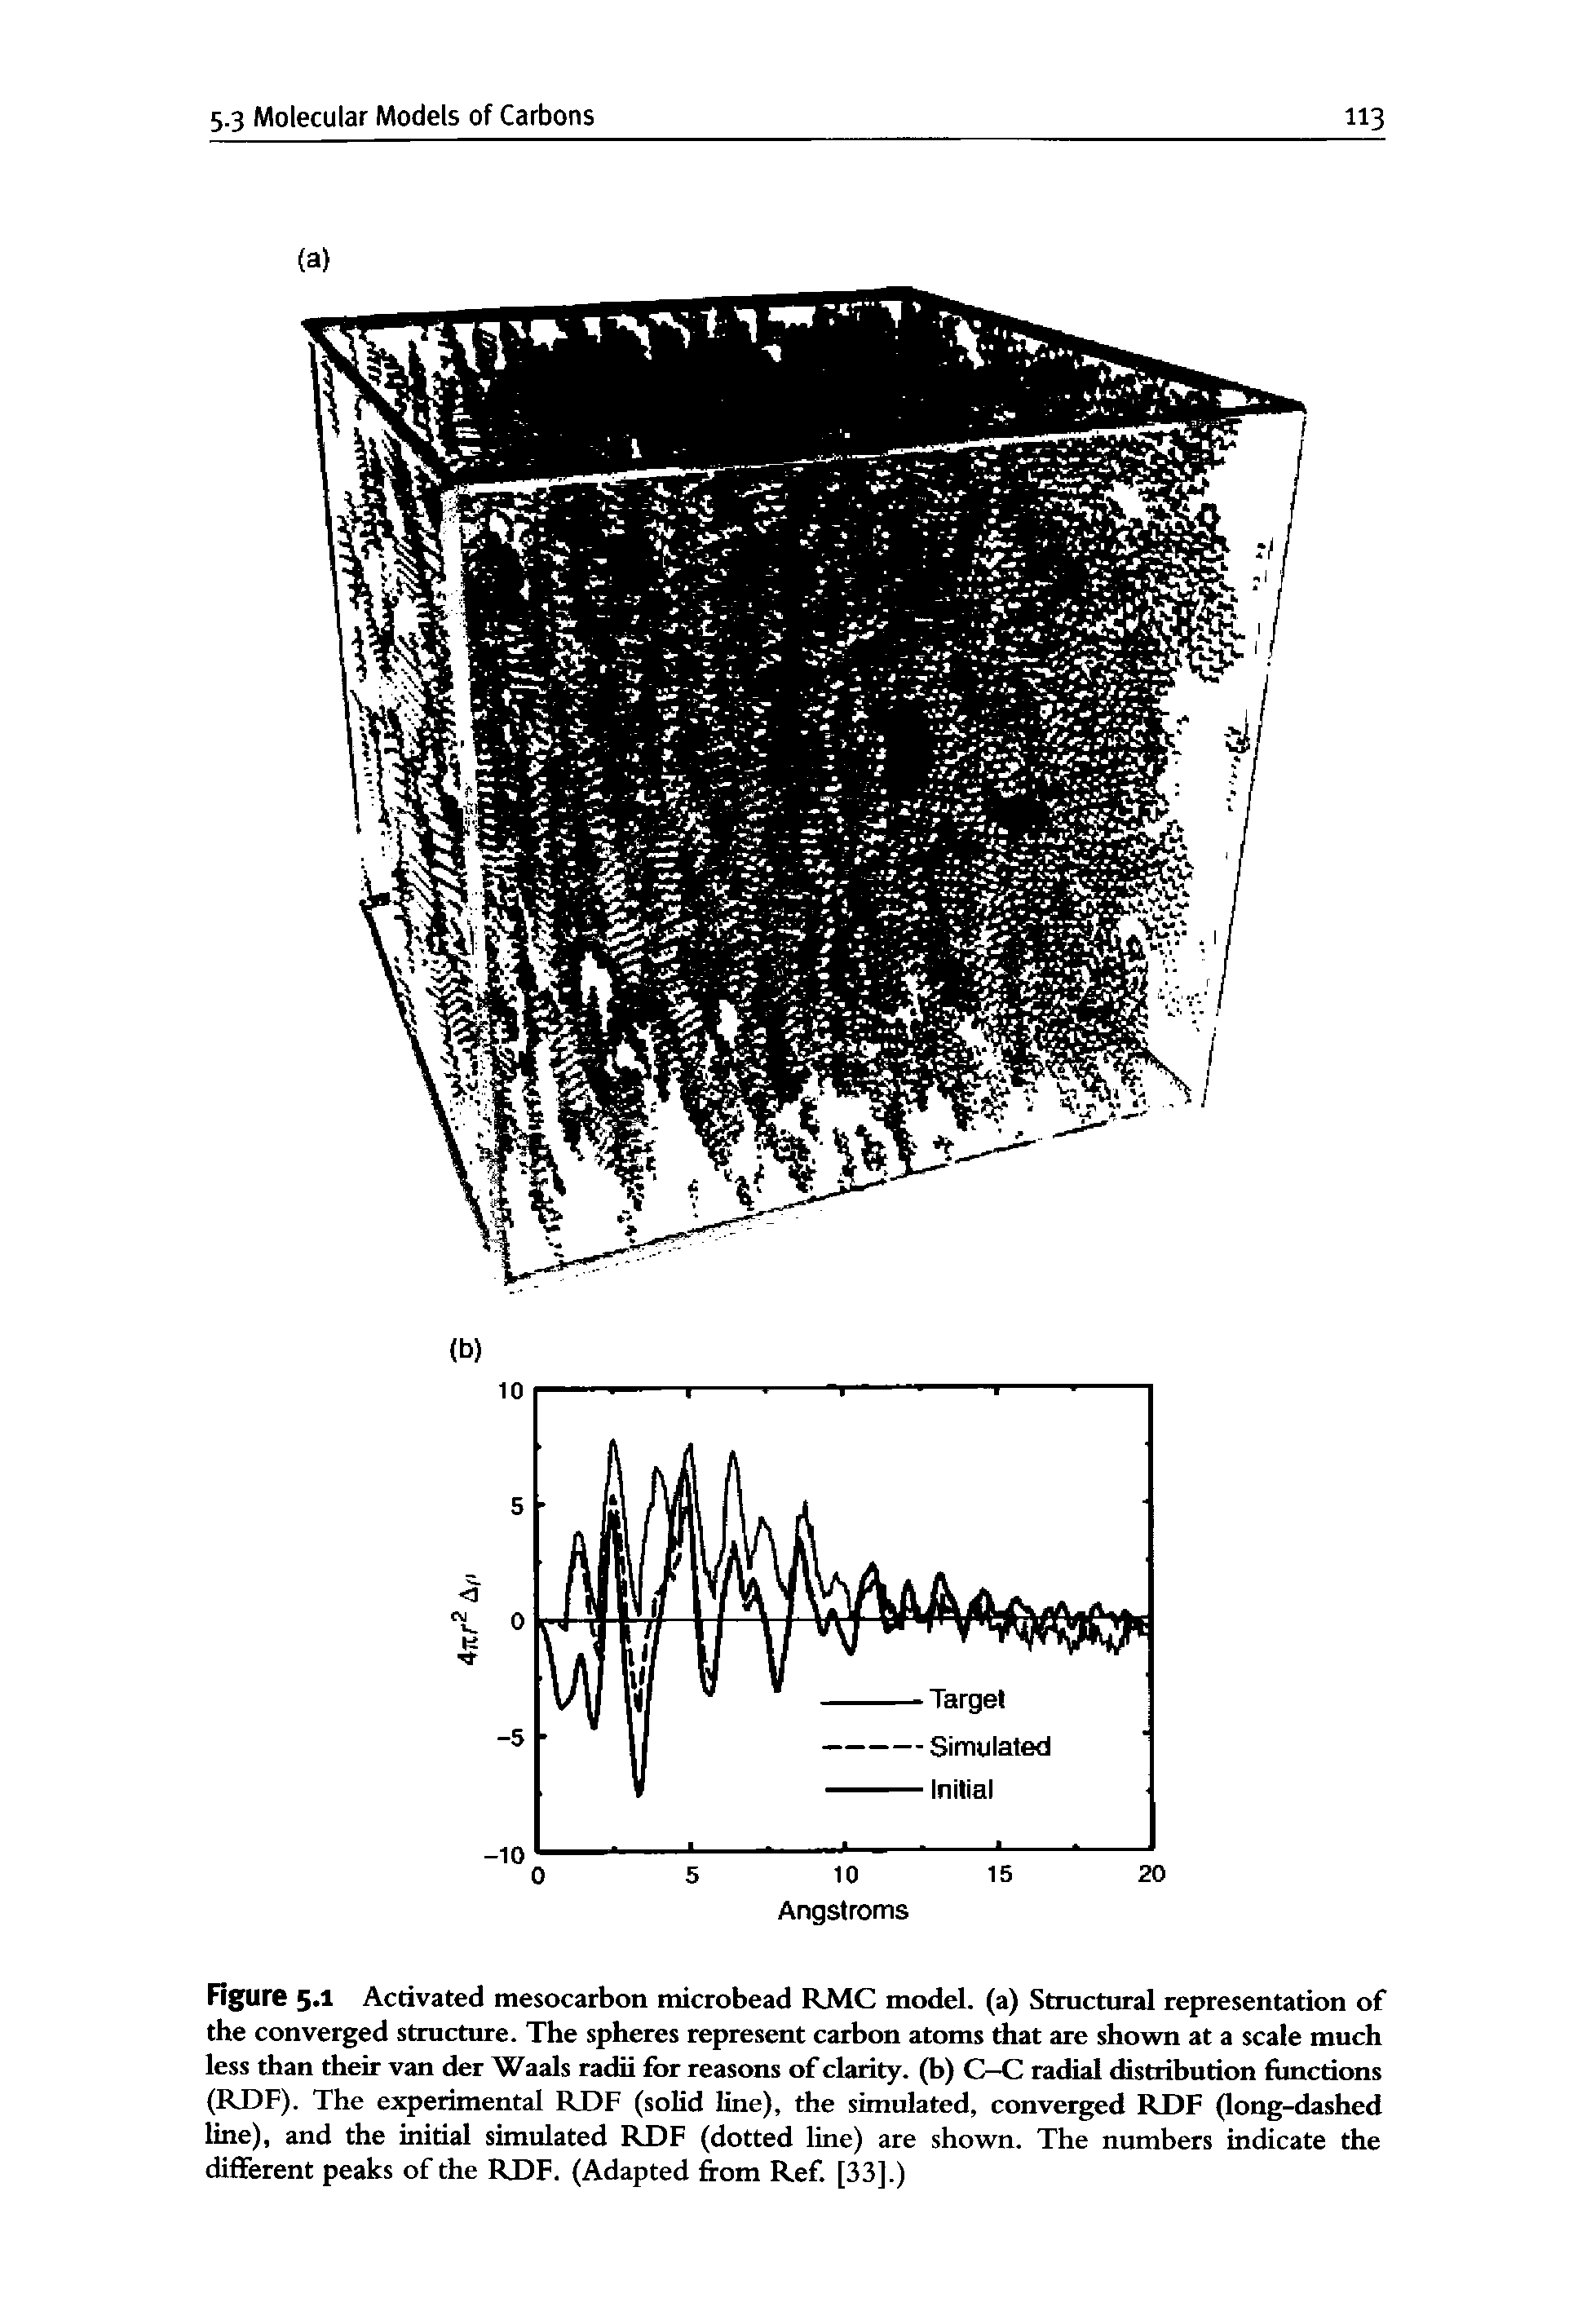 Figure 5 1 Activated mesocarbon microbead RAIC model, (a) Structural representation of the converged structure. The spheres represent carbon atoms that are shown at a scale much less than their van der Waals radii for reasons of clarity, (b) C-C radial distribution functions (RDF). The experimental RDF (solid line), the simulated, converged RDF (long-dashed line), and the initial simulated RDF (dotted line) are shown. The numbers indicate the different peaks of the RDF. (Adapted from Ref. [33].)...